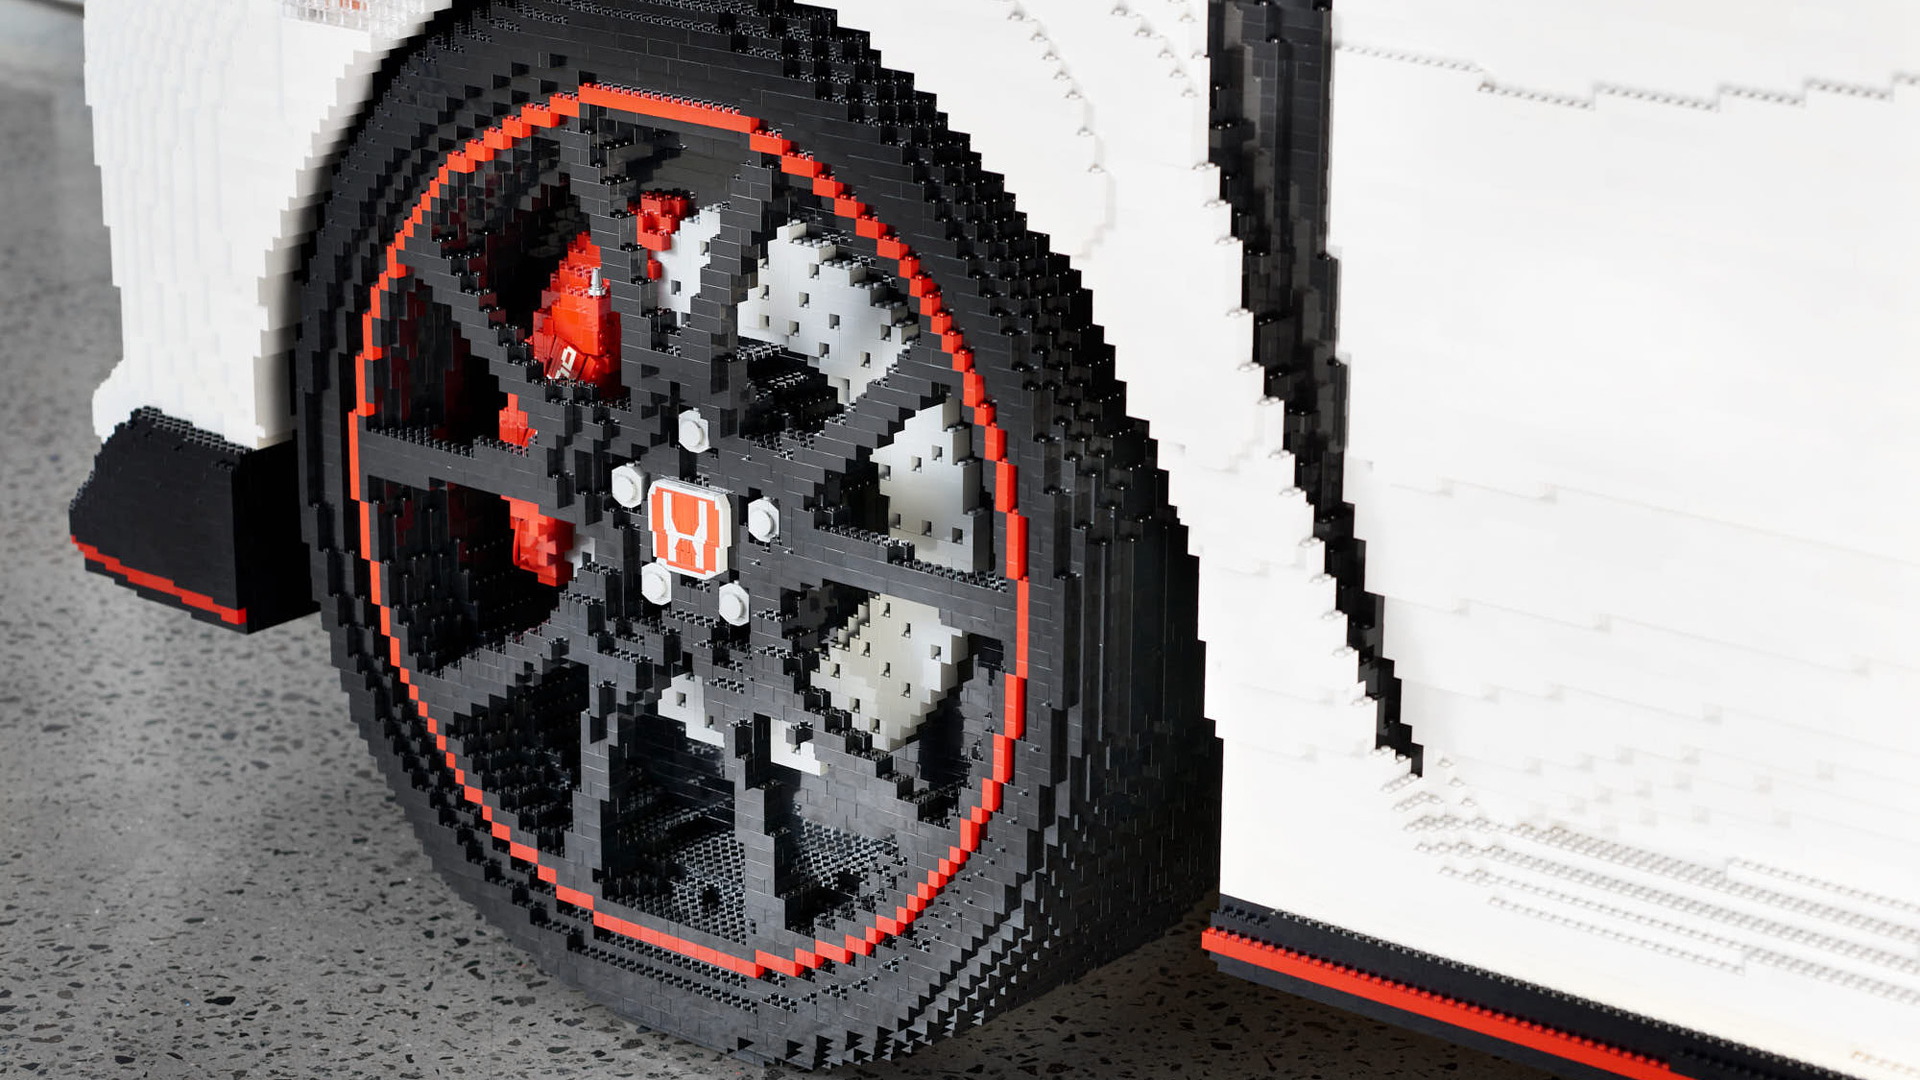 2019 Honda Civic Type R made from Lego